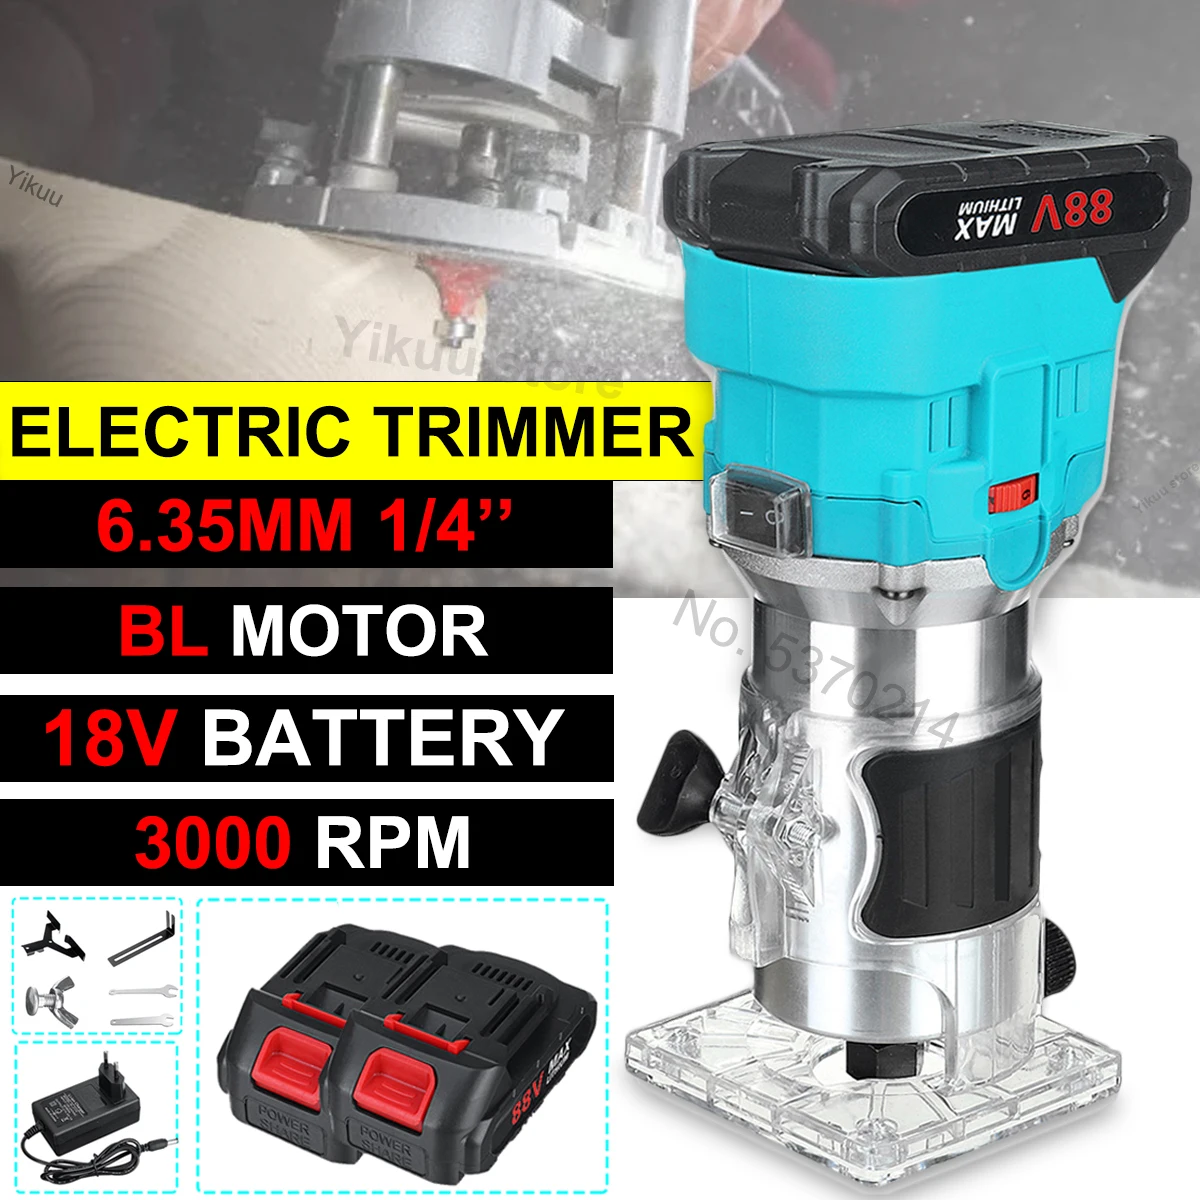 

1/4' Brushless Electric Trimmer Adjustable Cordless Engraving Slotting Carving Machine 6.35mm Wood Router for Makita 18V Battery